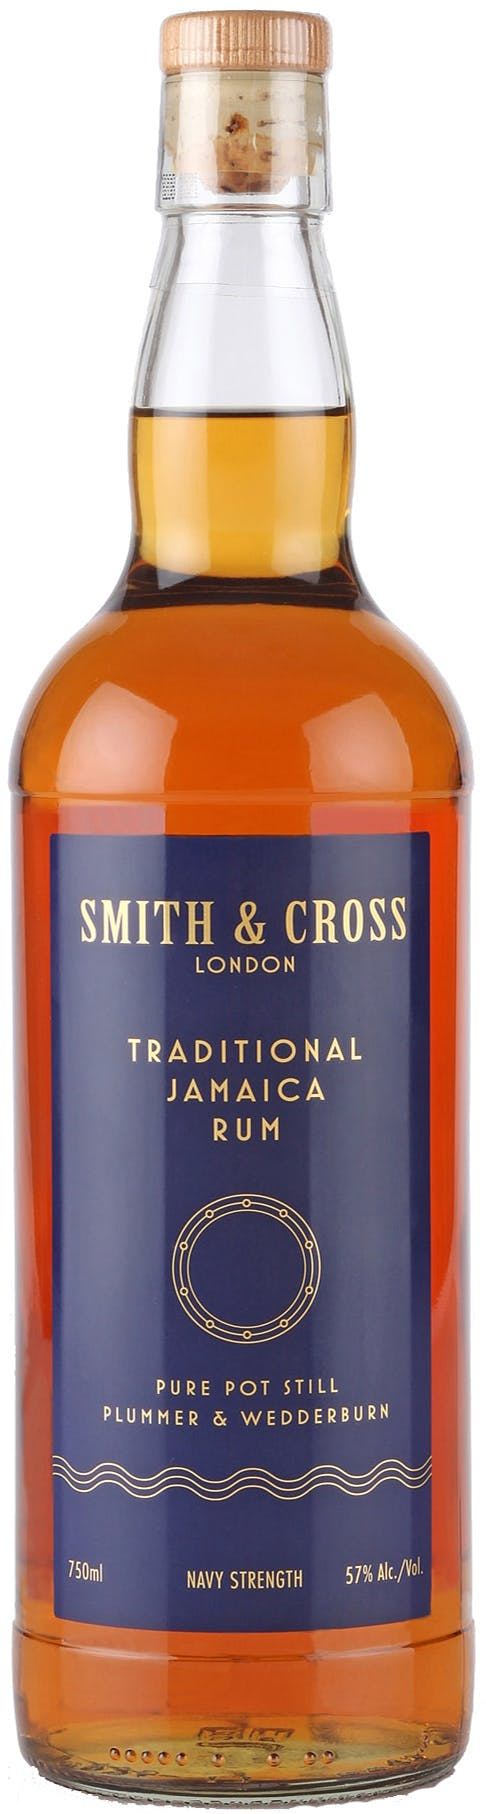 bottle of smith and cross